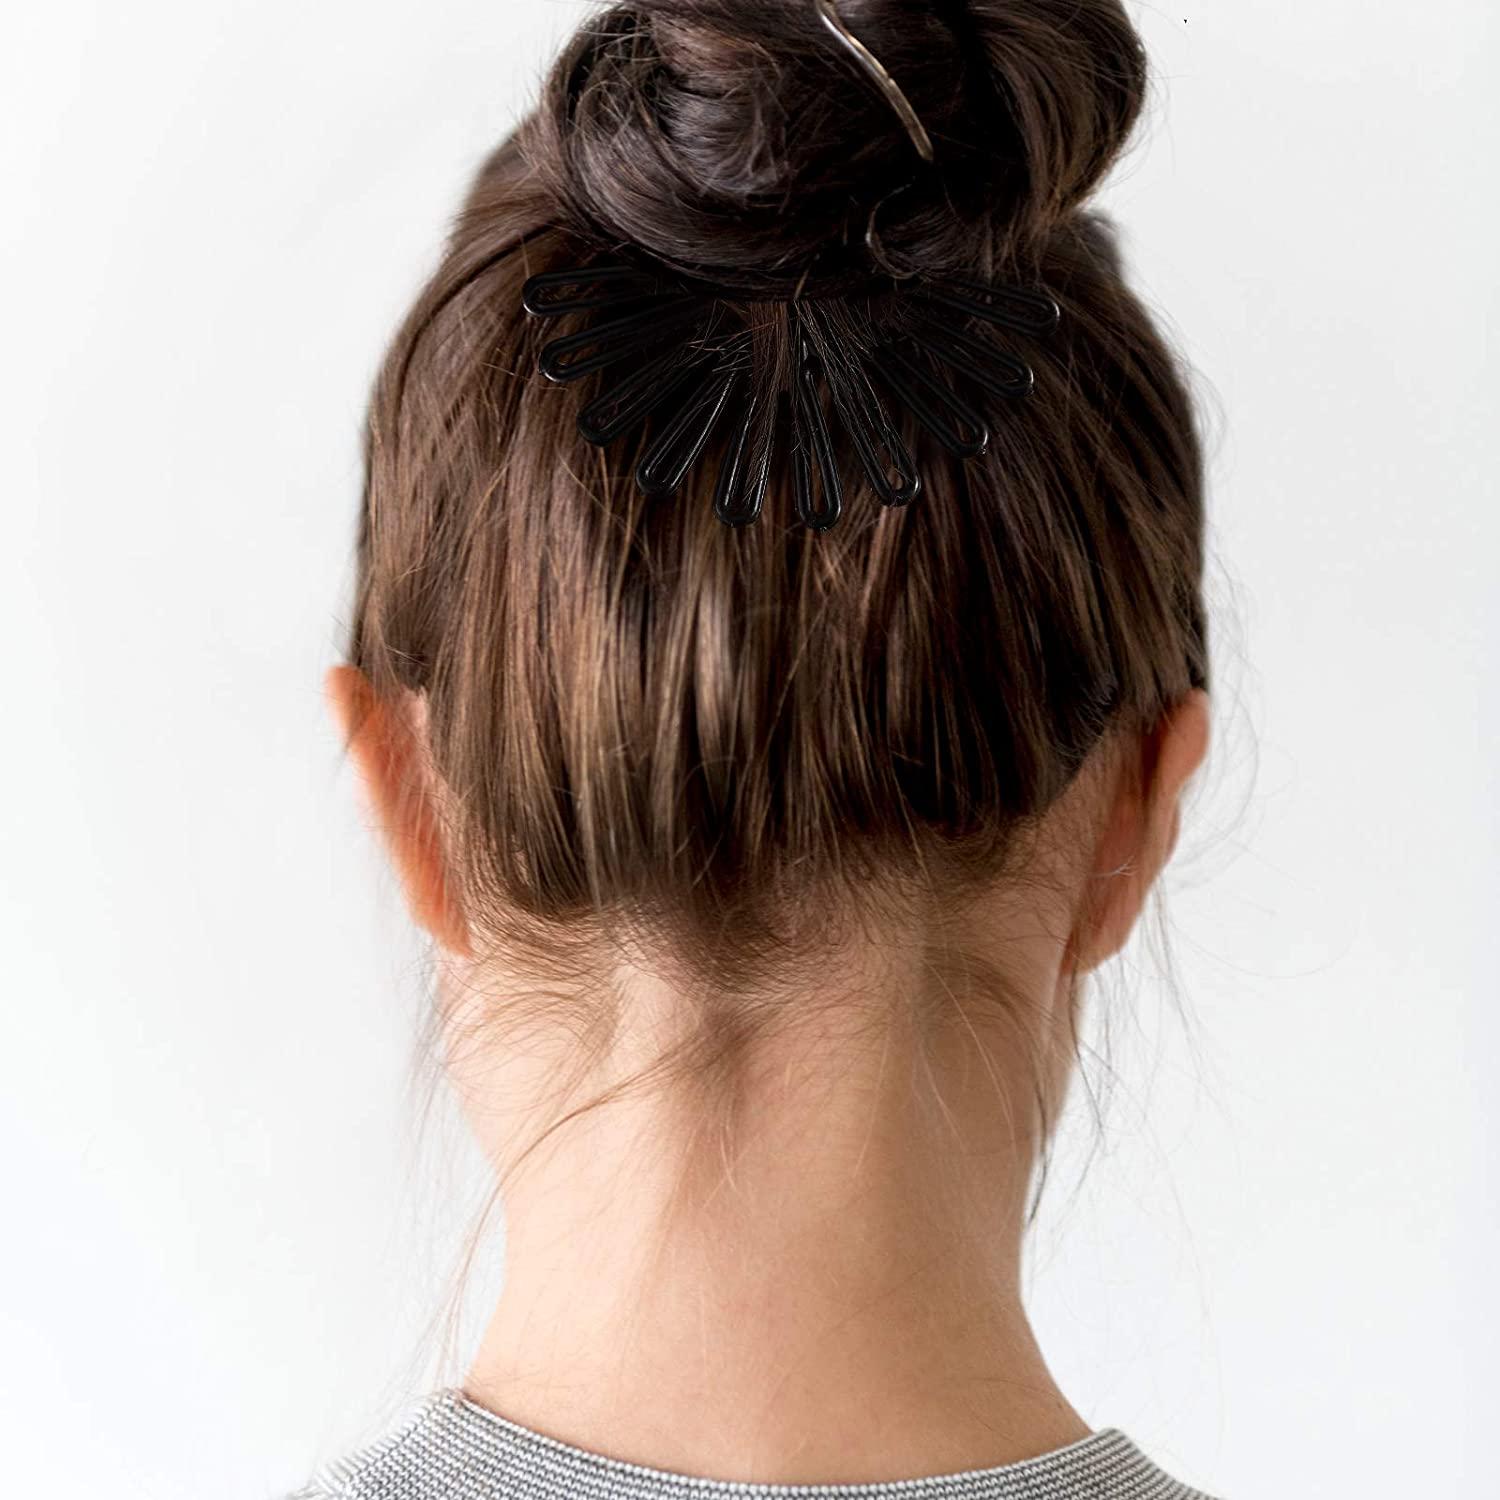 Blonde Fun Messy Bun w/Short Straight Hair w/Bendable Wires Claw clip -  www.BuySpecial.Gifts